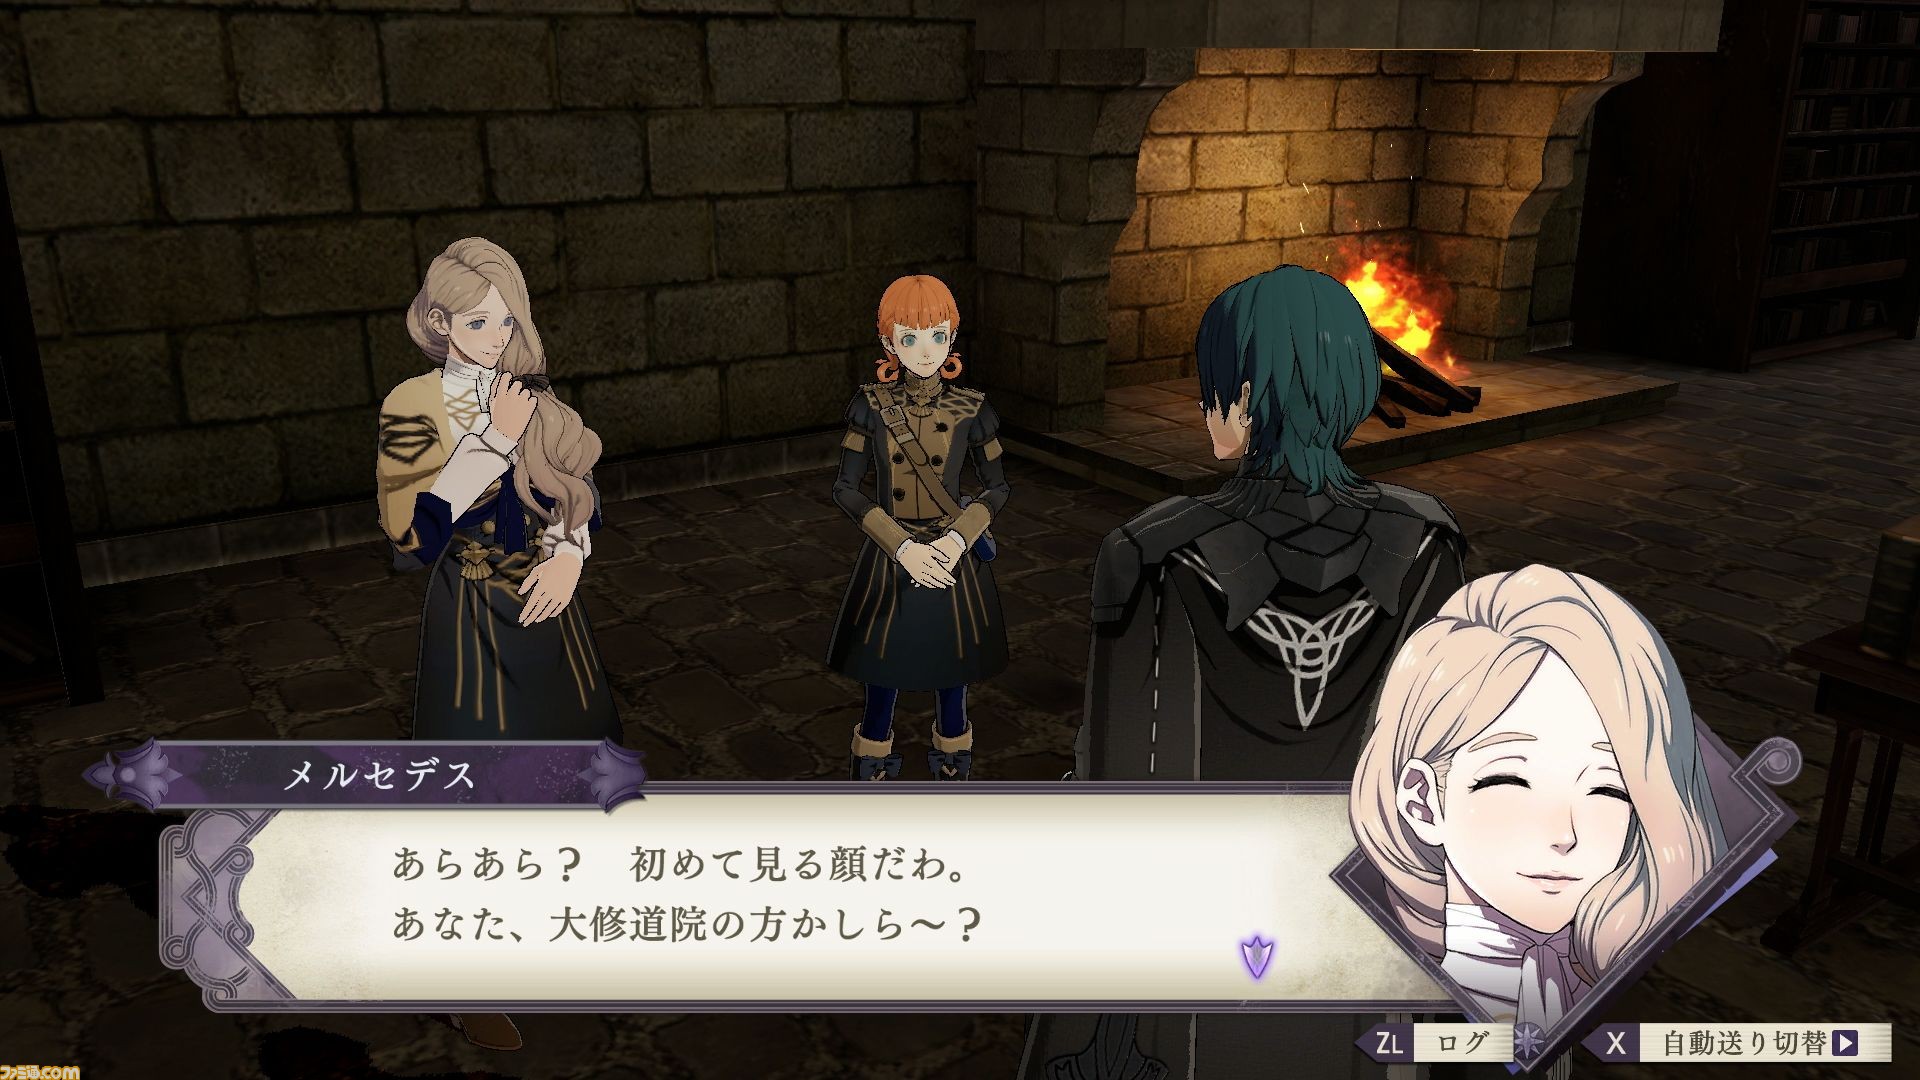 https://www.perfectly-nintendo.com/wp-content/uploads/sites/1/nggallery/fire-emblem-three-houses-25-04-2019-1/64.jpg